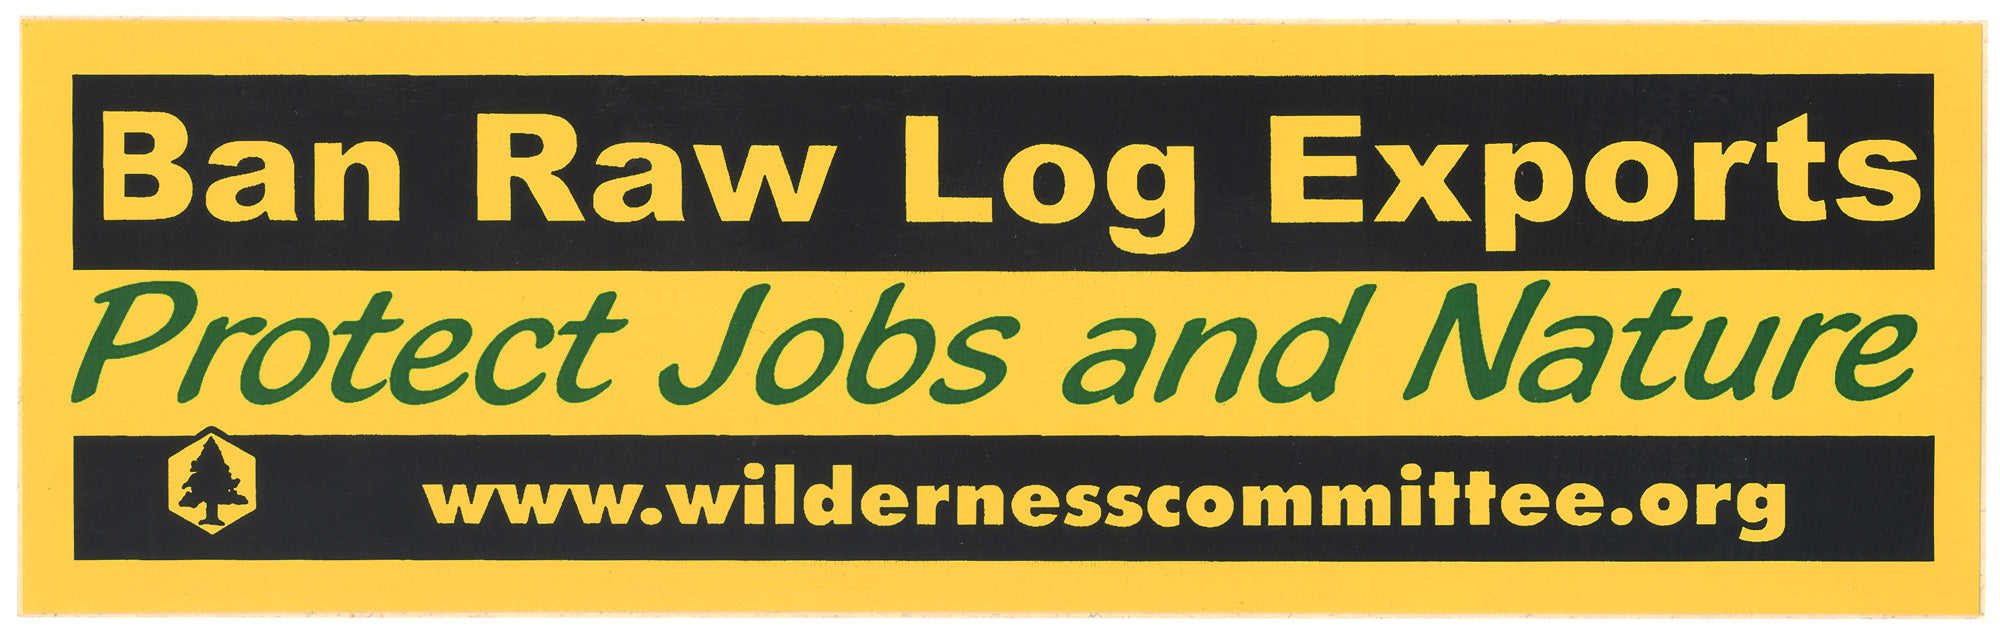 A sticker that says "Band Raw Log Exports. Protect Jobs and Nature. www.wildernesscommittee.org." End of image descritpion.